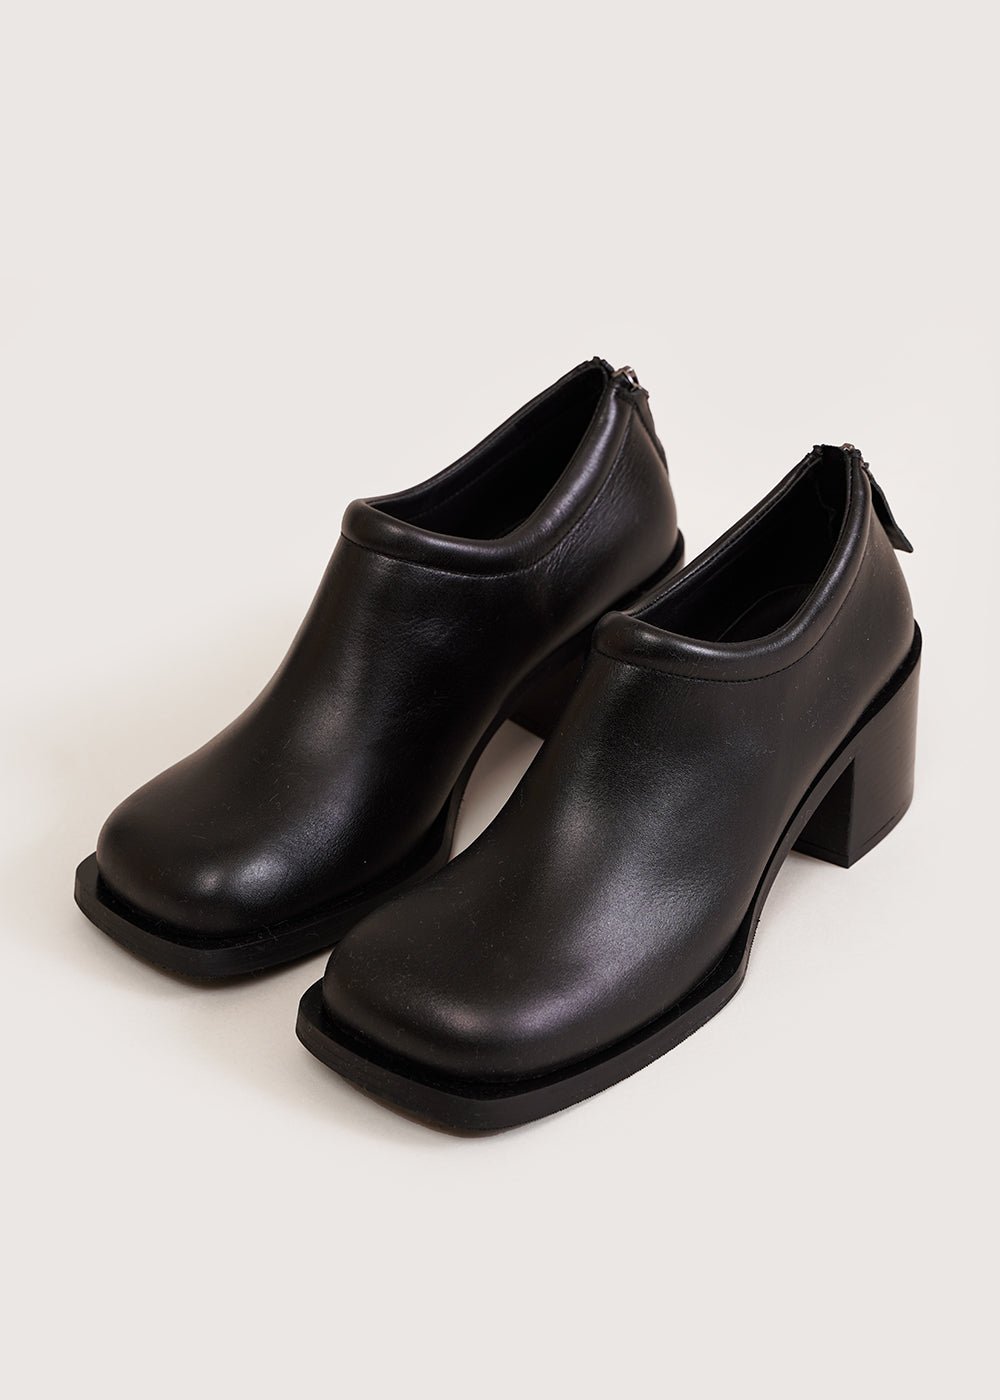 About Arianne Black Ava Pumps - New Classics Studios Sustainable Ethical Fashion Canada